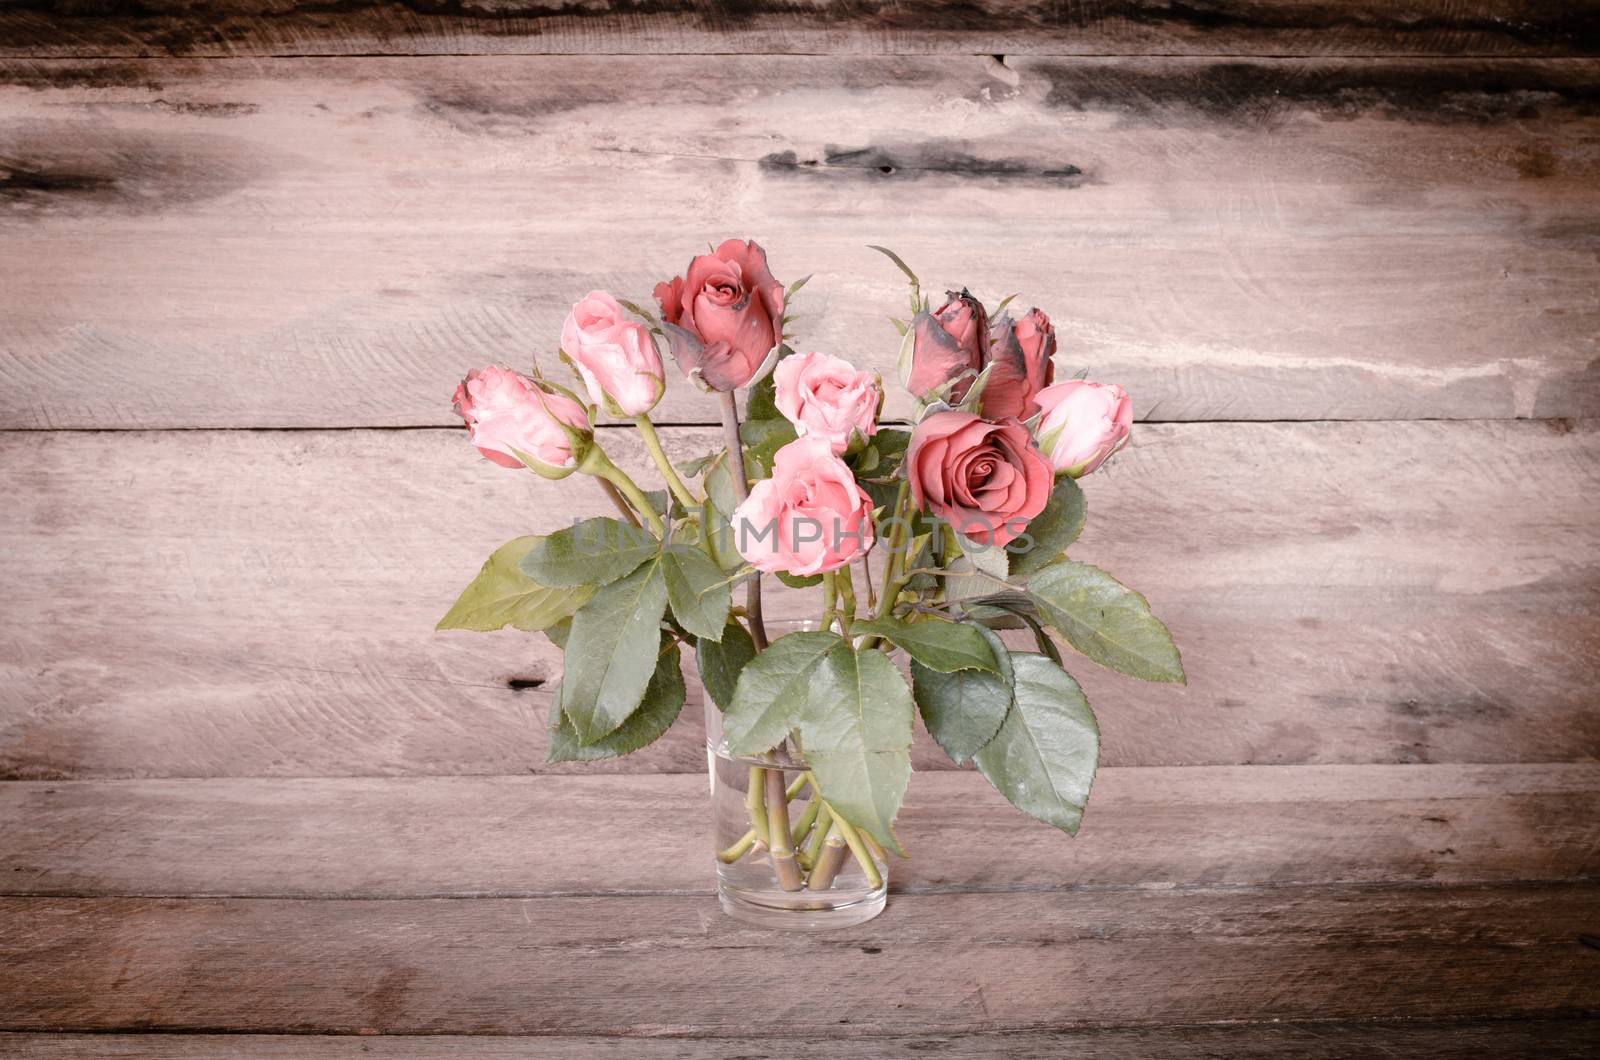 roses in glass on wooden bacgrould